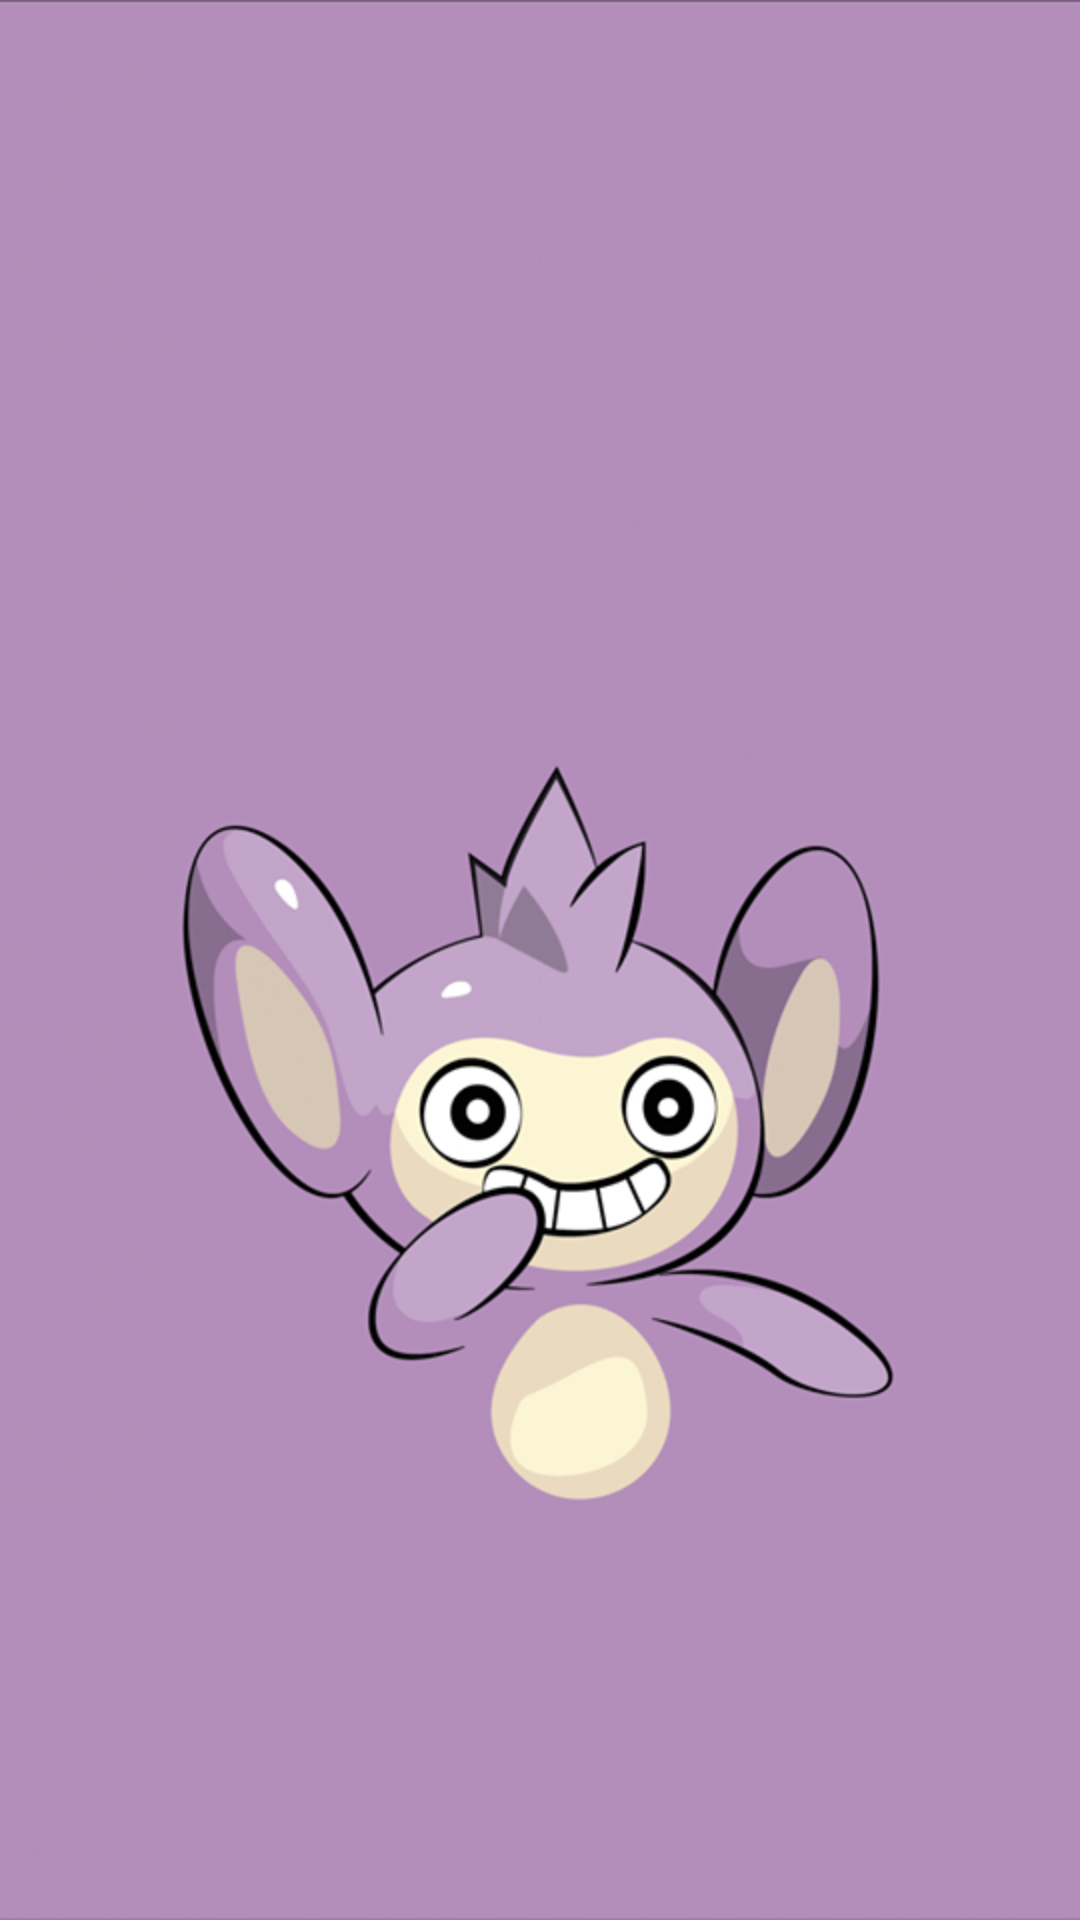 Download Aipom 1080 x 1920 Wallpaper